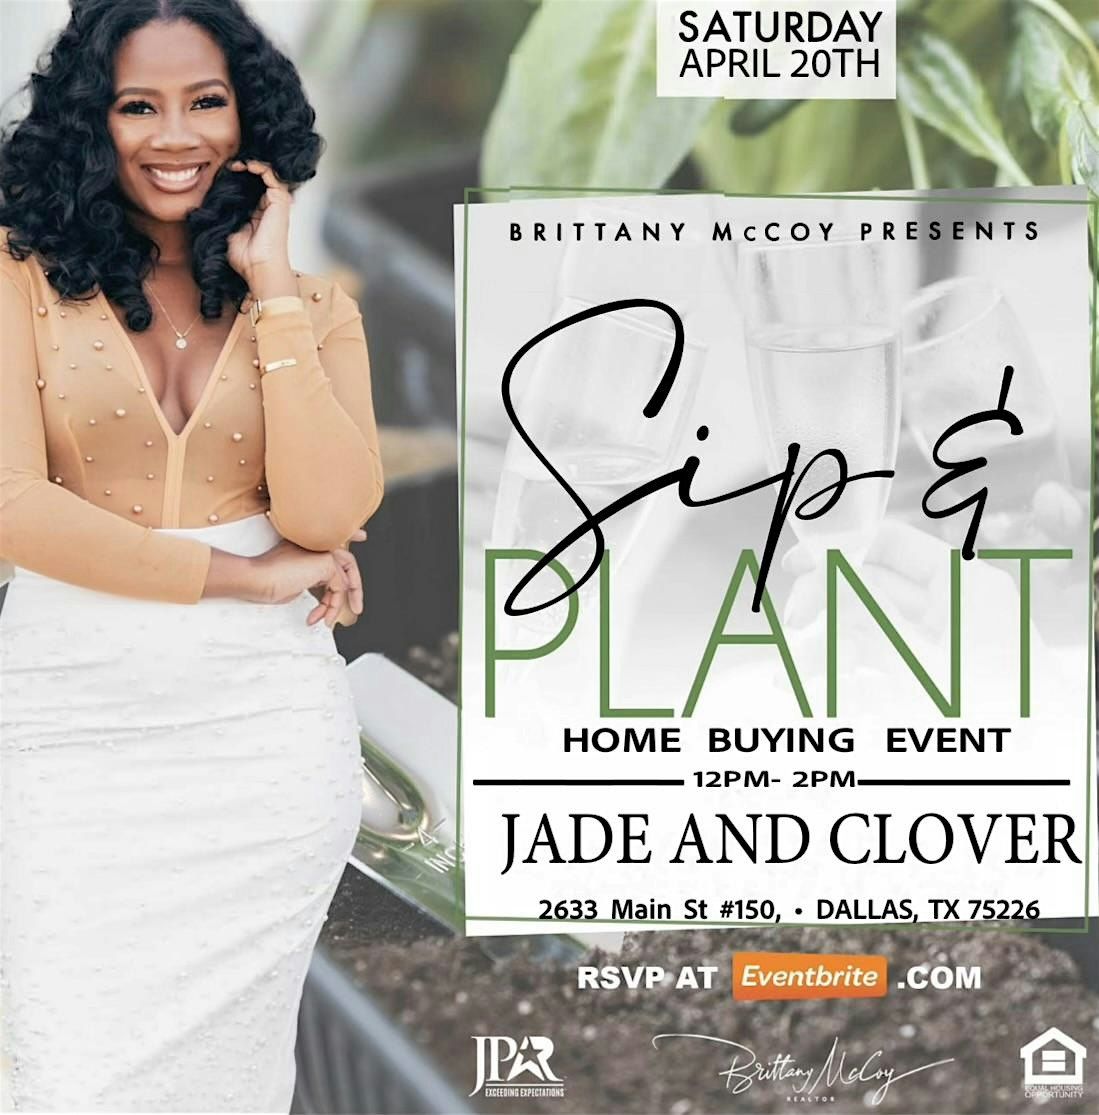 Sip and Plant: An Immersive Home Buying Event!